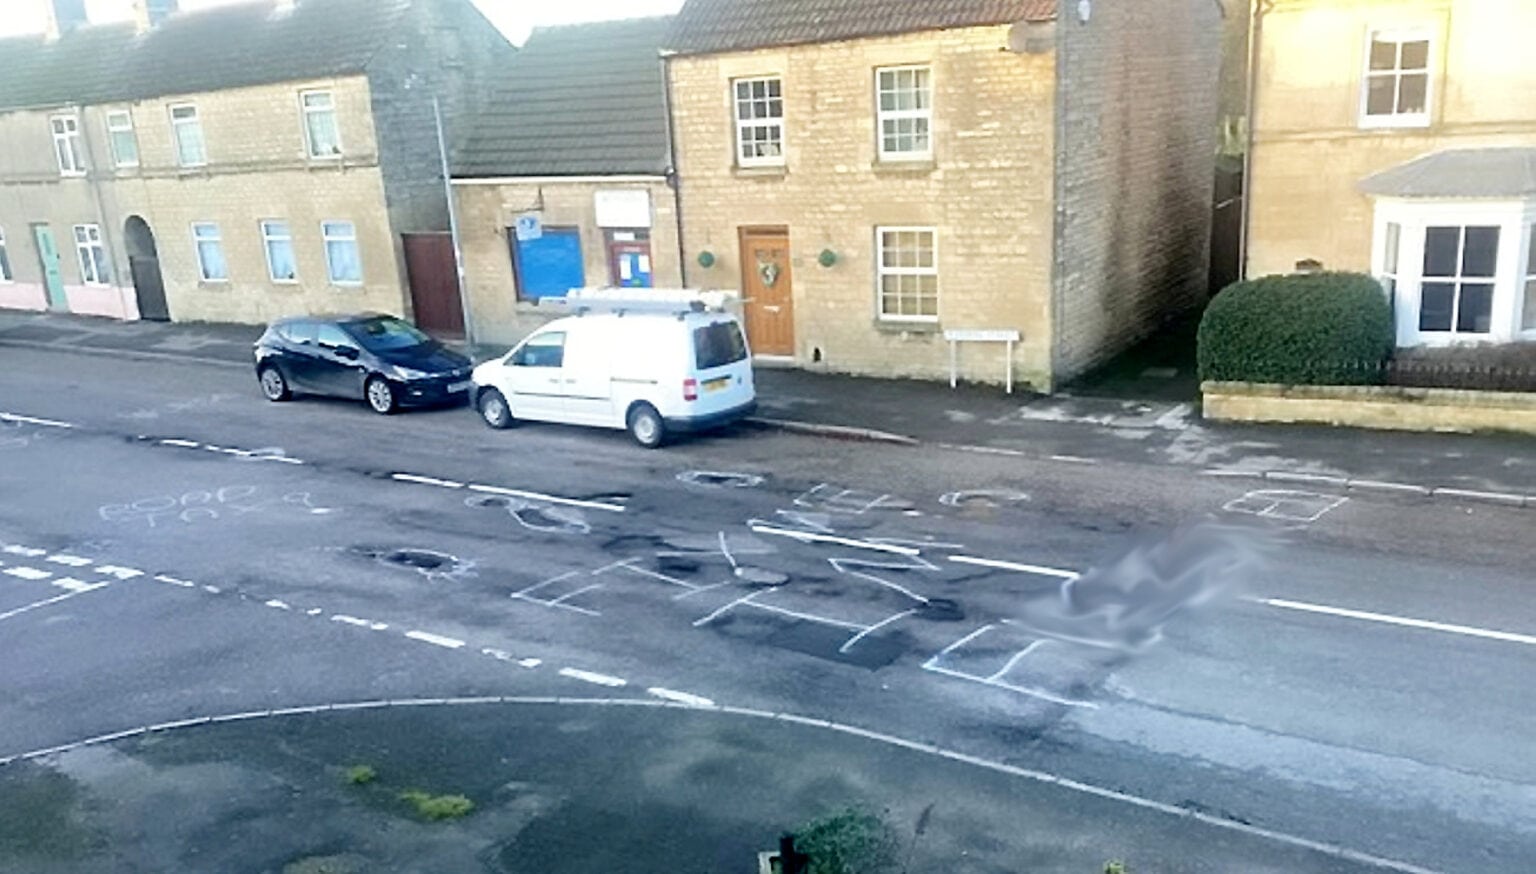 Residents fed up with potholes write ‘Fix me, I’m f****d’ on the street